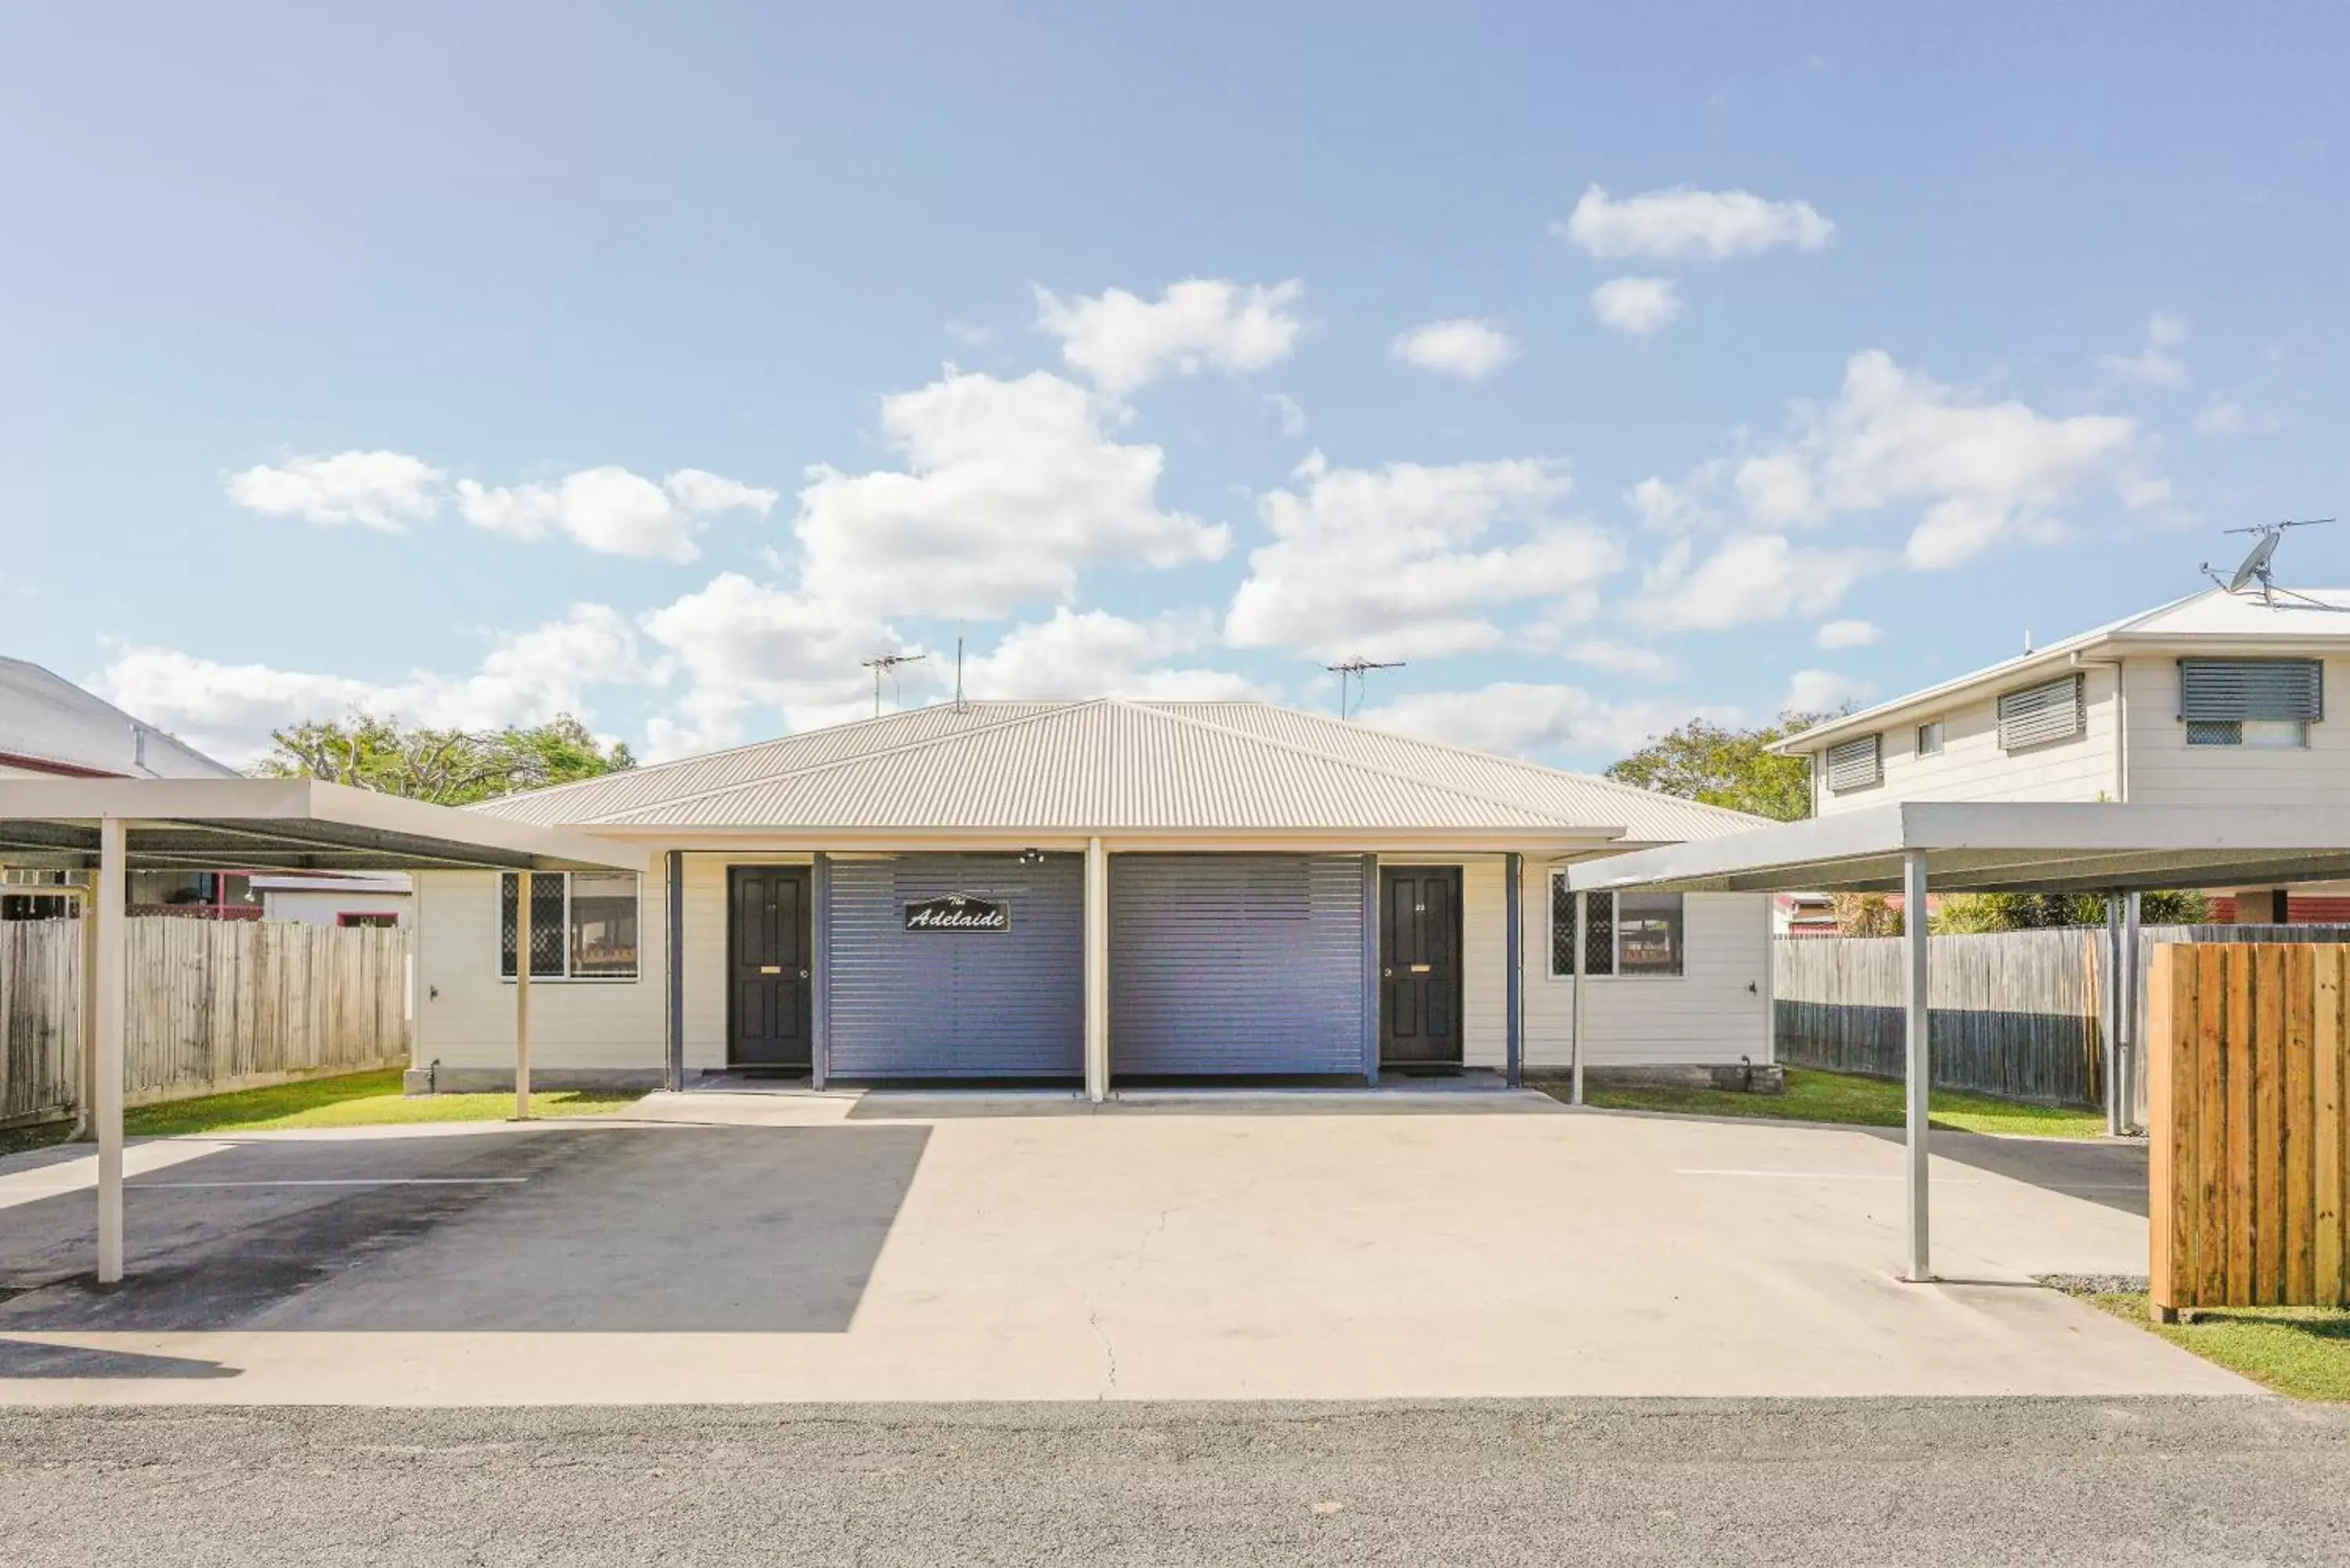 Property Building in Rockhampton Serviced Apartments